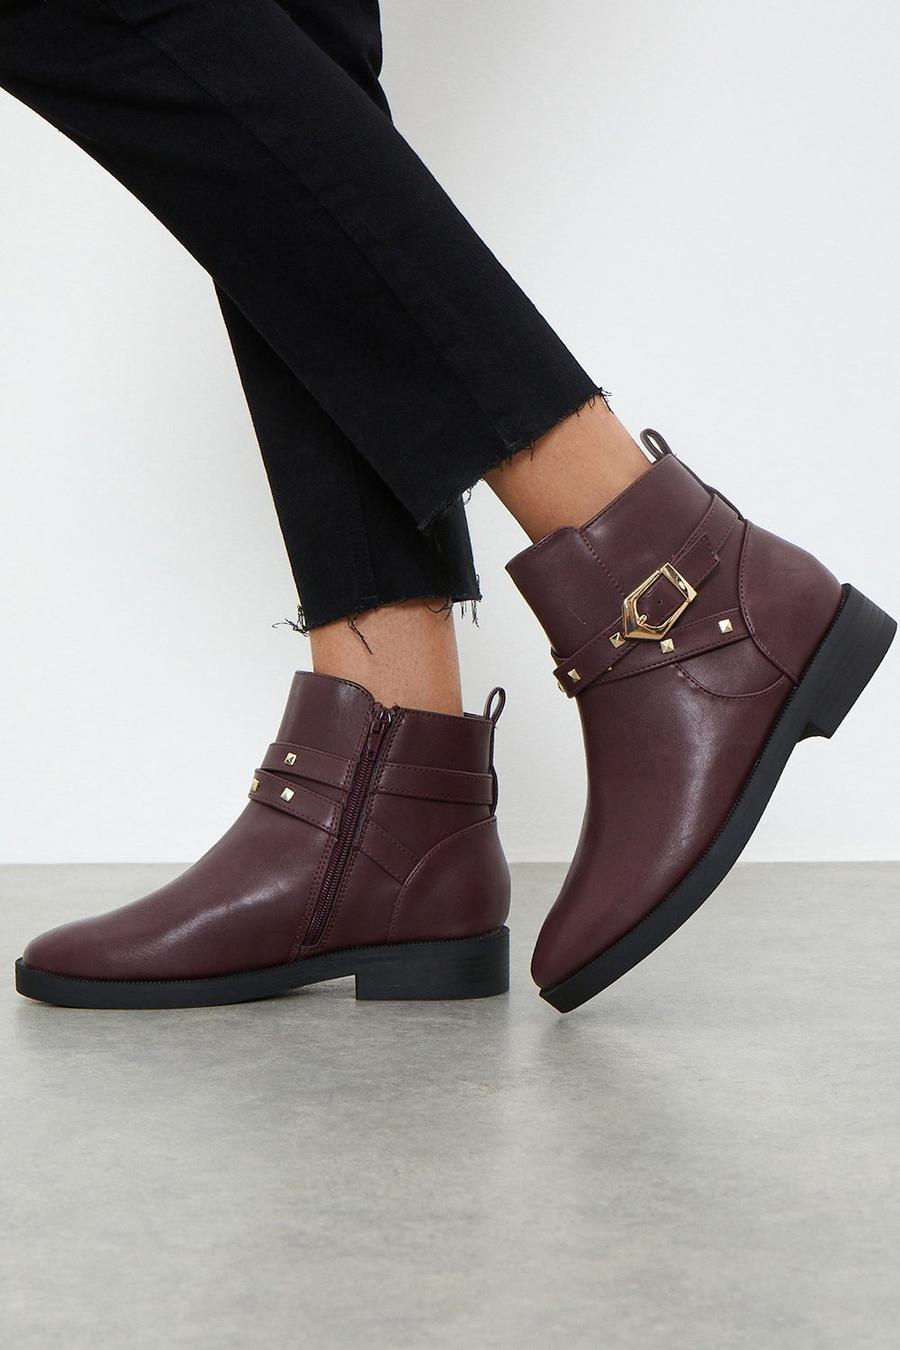 Good For The Sole: Maisie Comfort Wide Fit Ankle Boot 